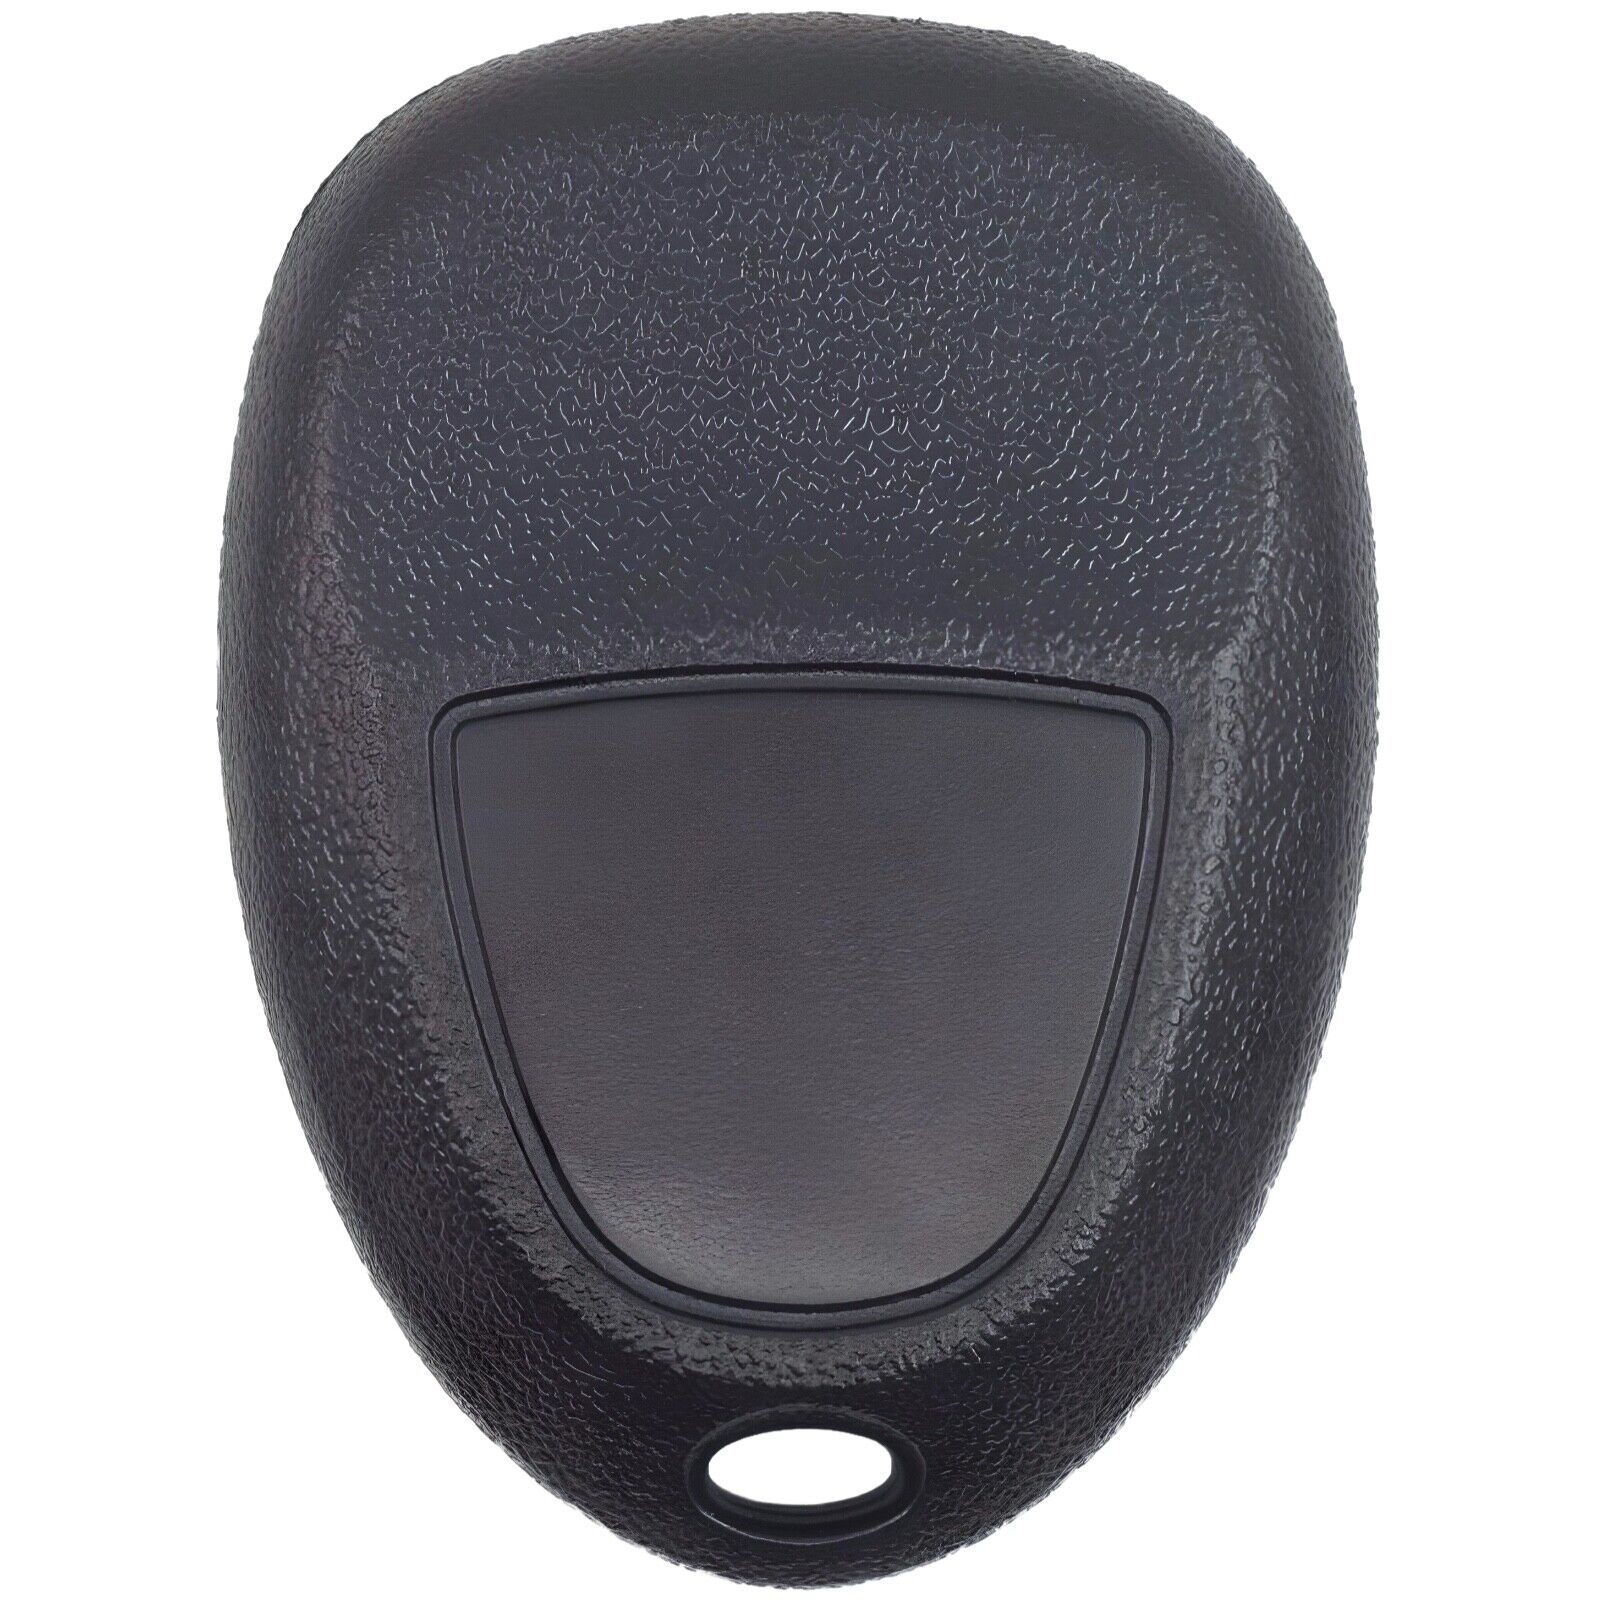 vKey Fob Replacement For 2005-2007 Buick Terraza FCC ID: KOBGT04A